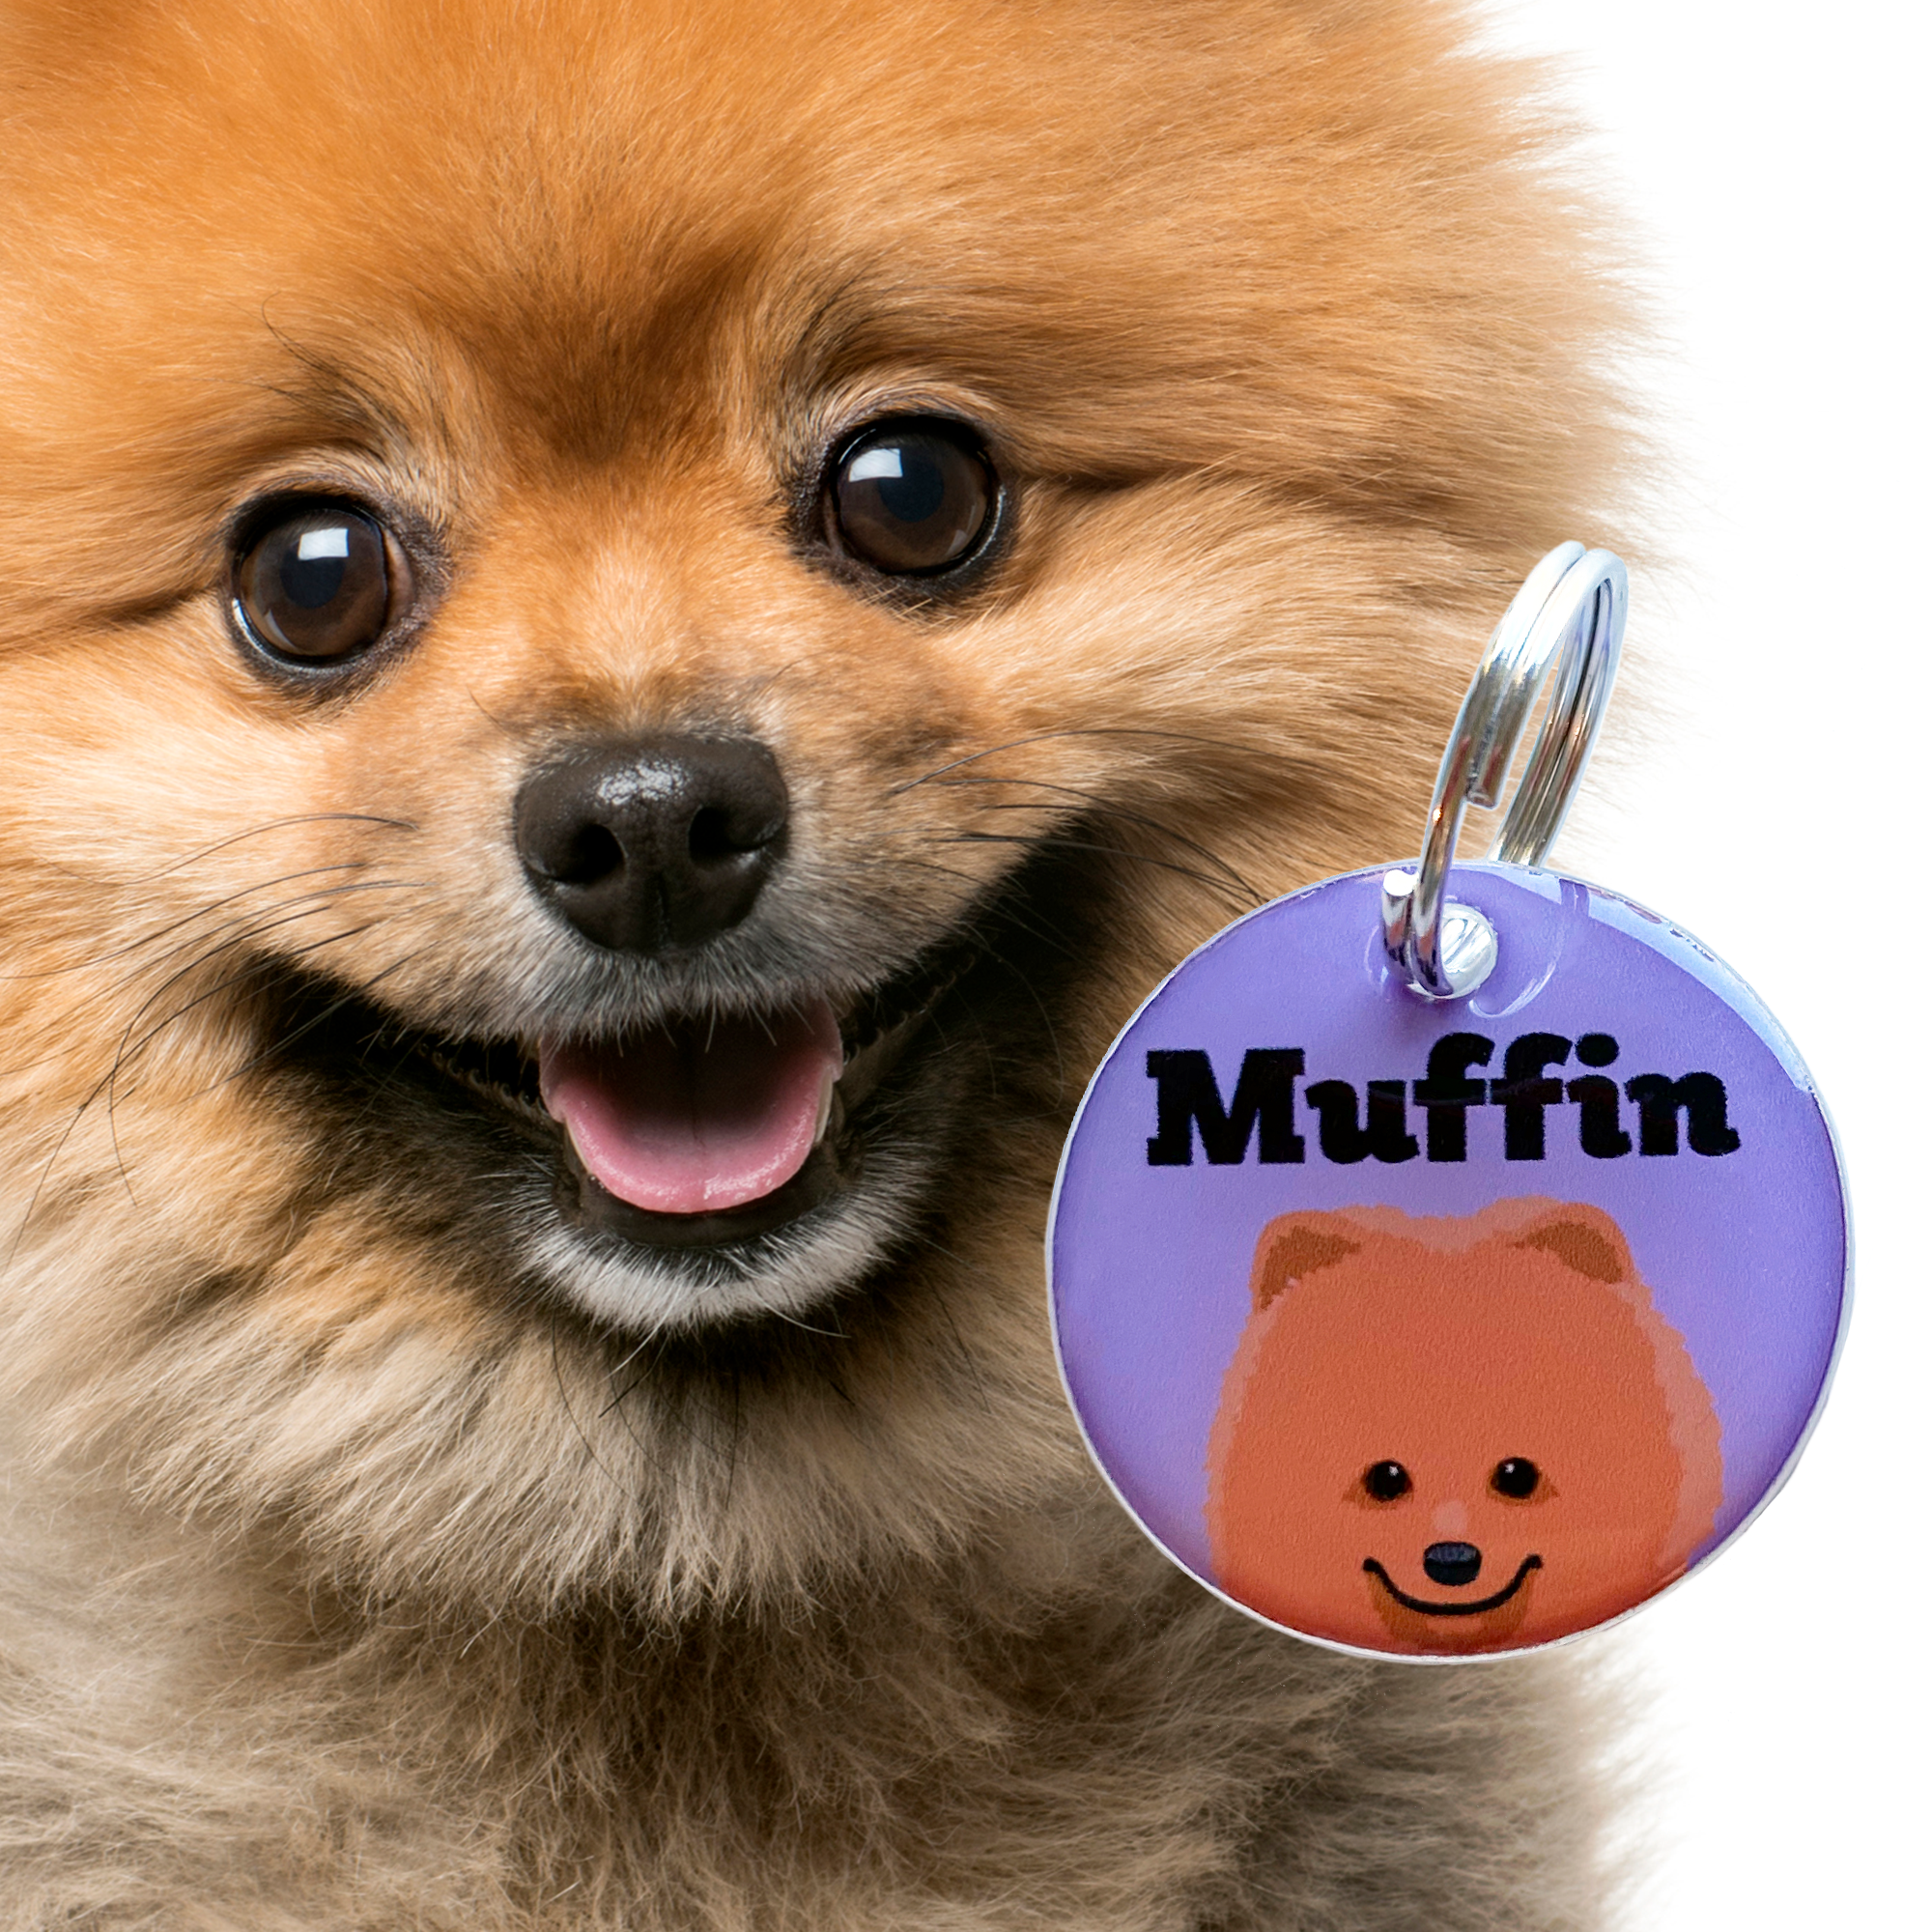 Pomeranian Double-Sided Dog Tag | Unique Pet ID Tags by Bashtags®